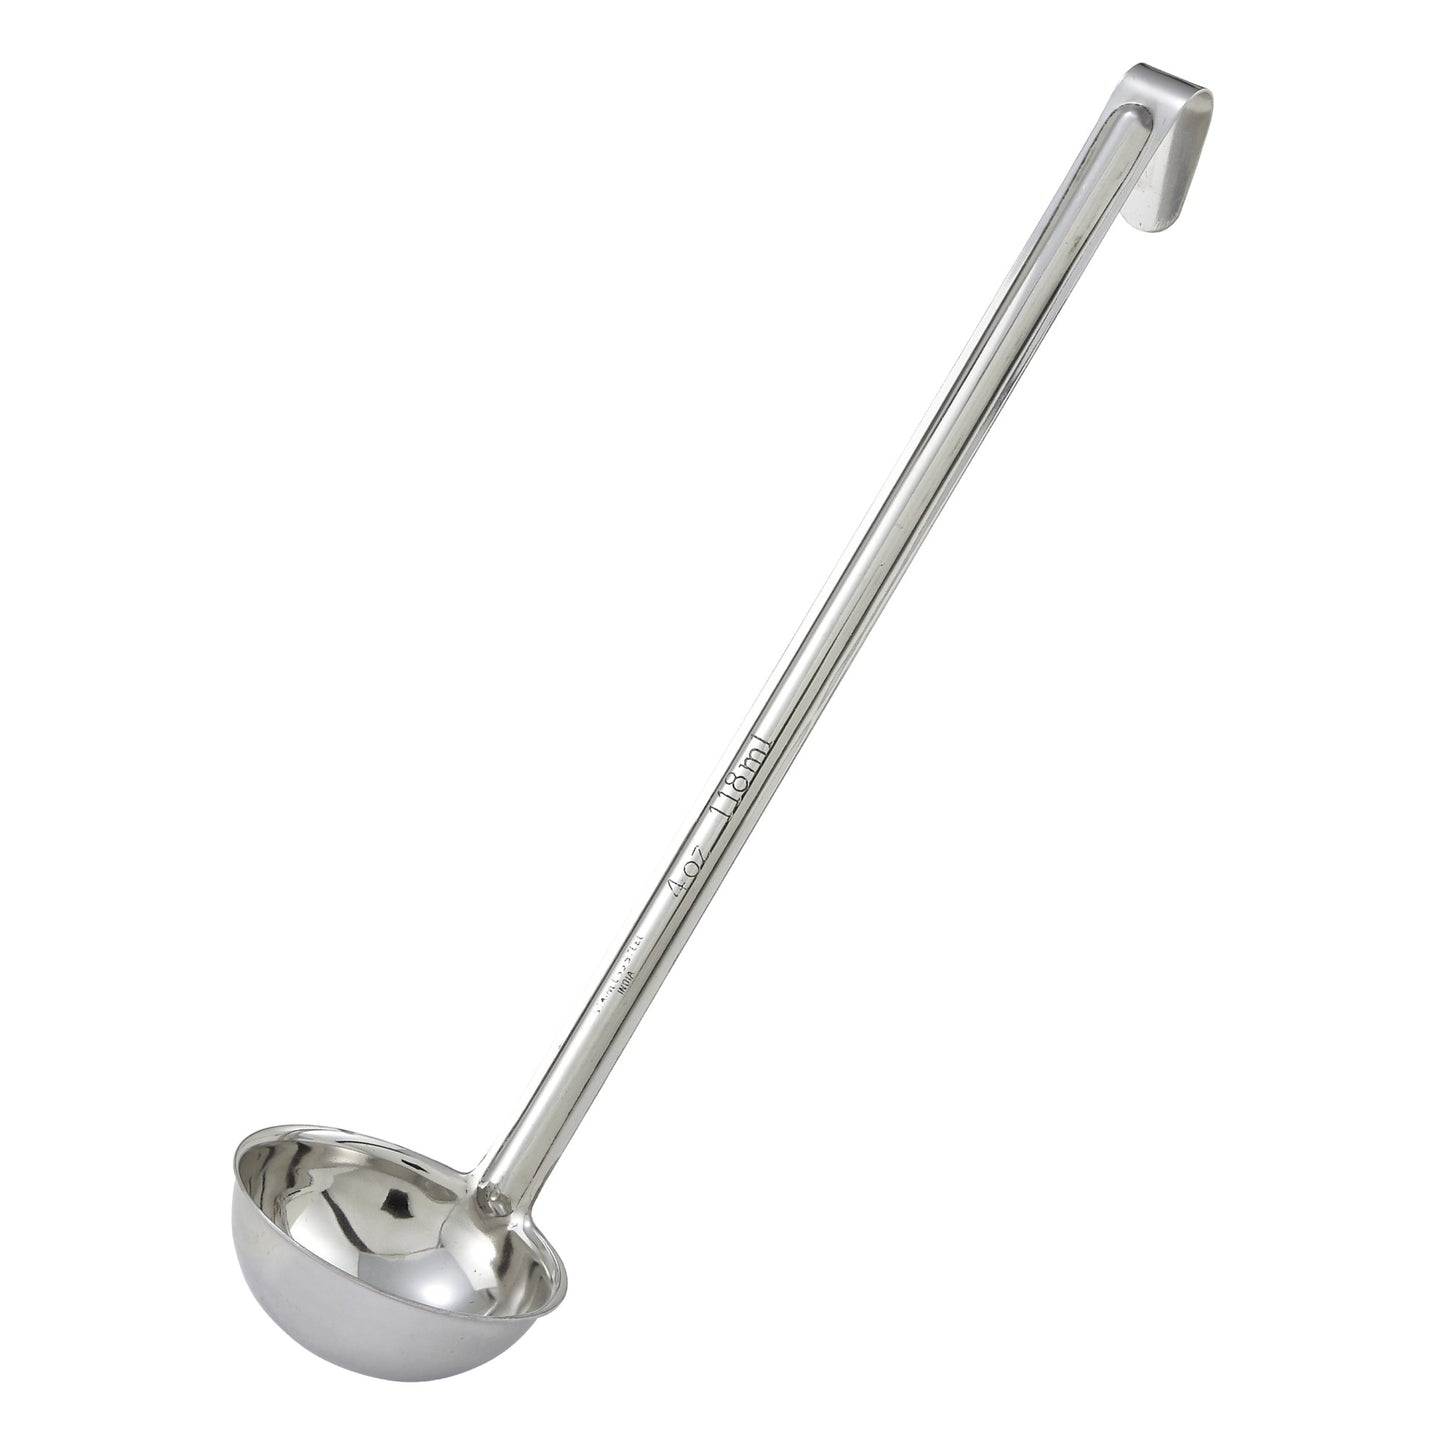 Winco Prime One-Piece Ladle, Stainless Steel - 4 oz